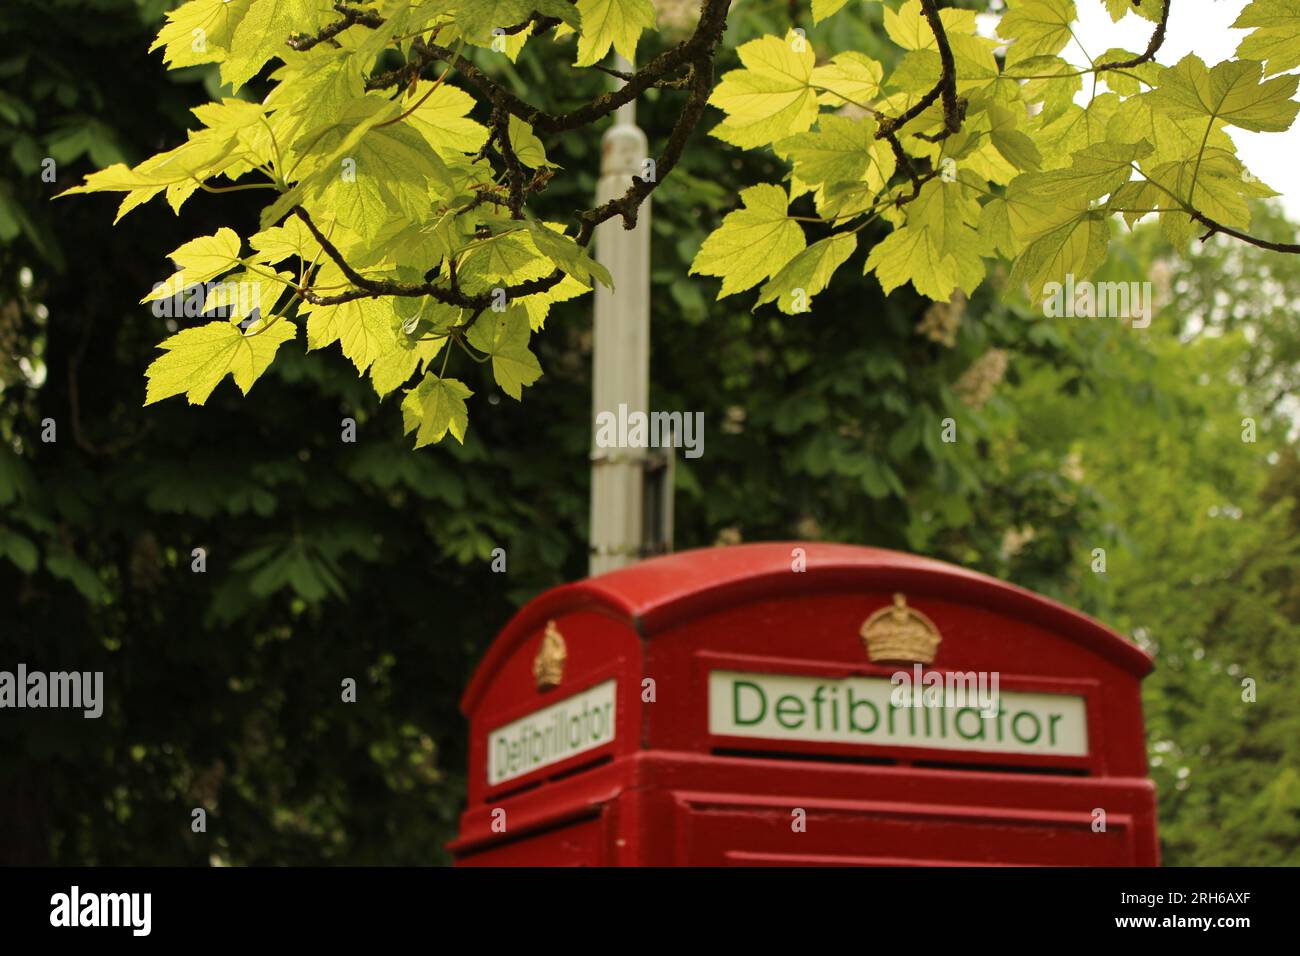 Green leaves hanging over old red telephone box converted to hold a defibrillator. Typical British telephone booth reimagined as defibrillator station Stock Photo